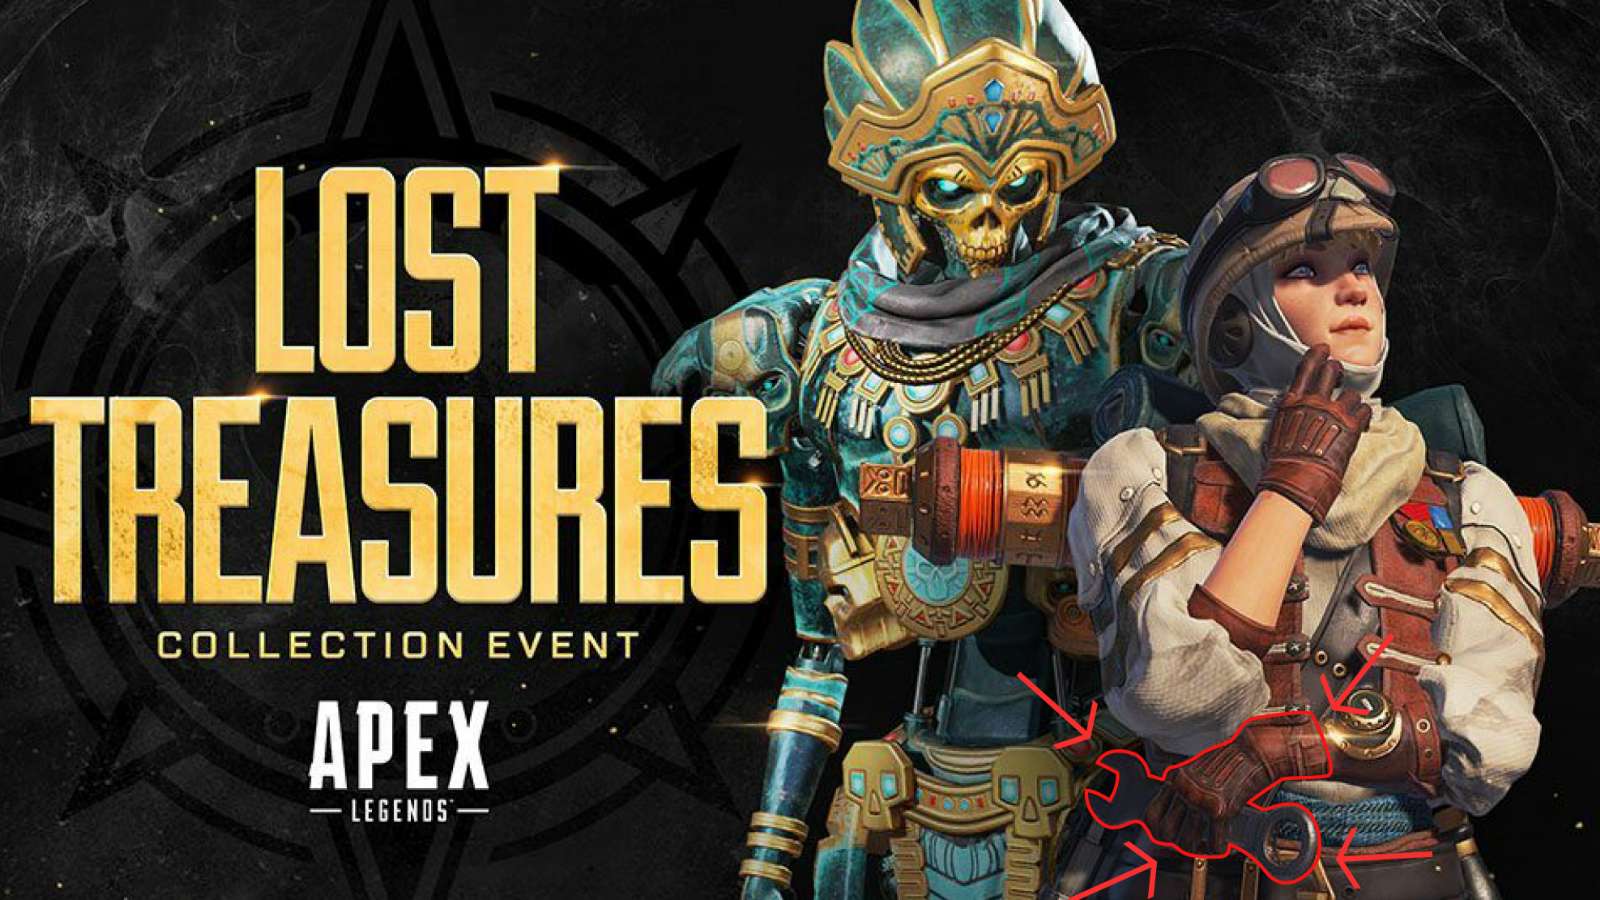 Revenant and Wattson in new skins for Lost Treasures event.